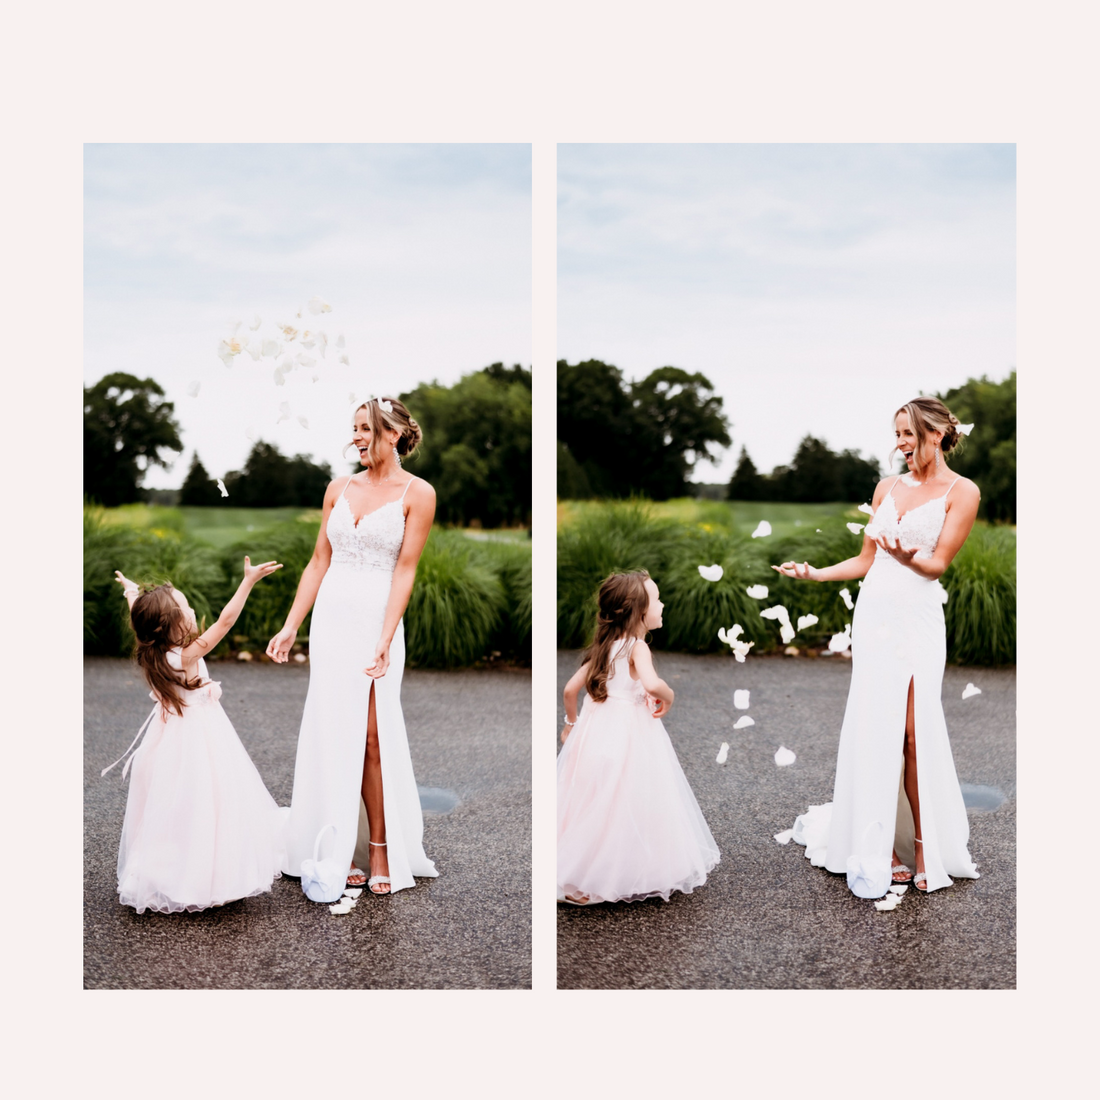 A bride with her flower girl on her wedding day throwing flower petals near the flower girl dress and wedding dress